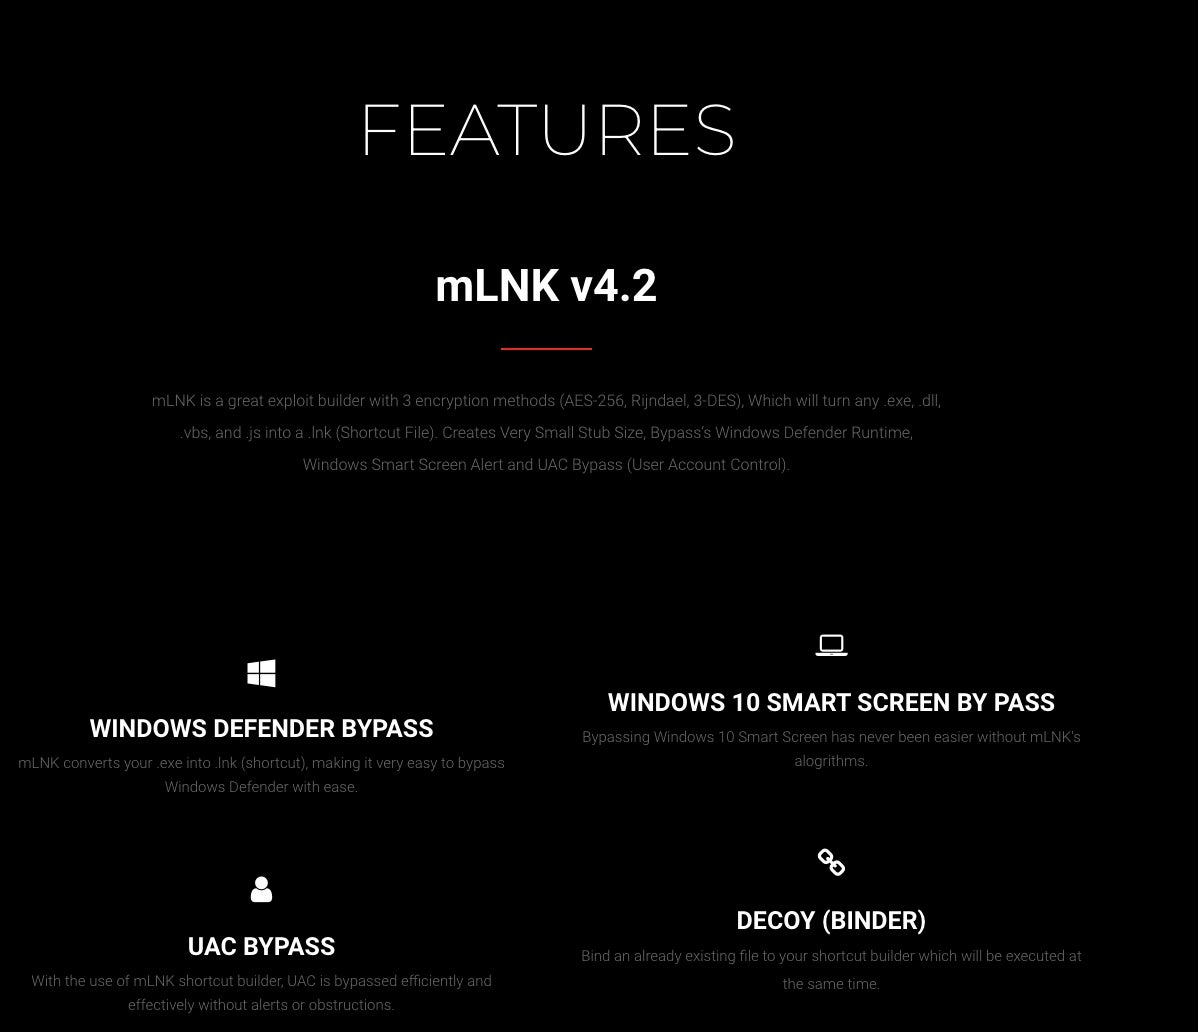 Advertising page of mLNK 4.2 features